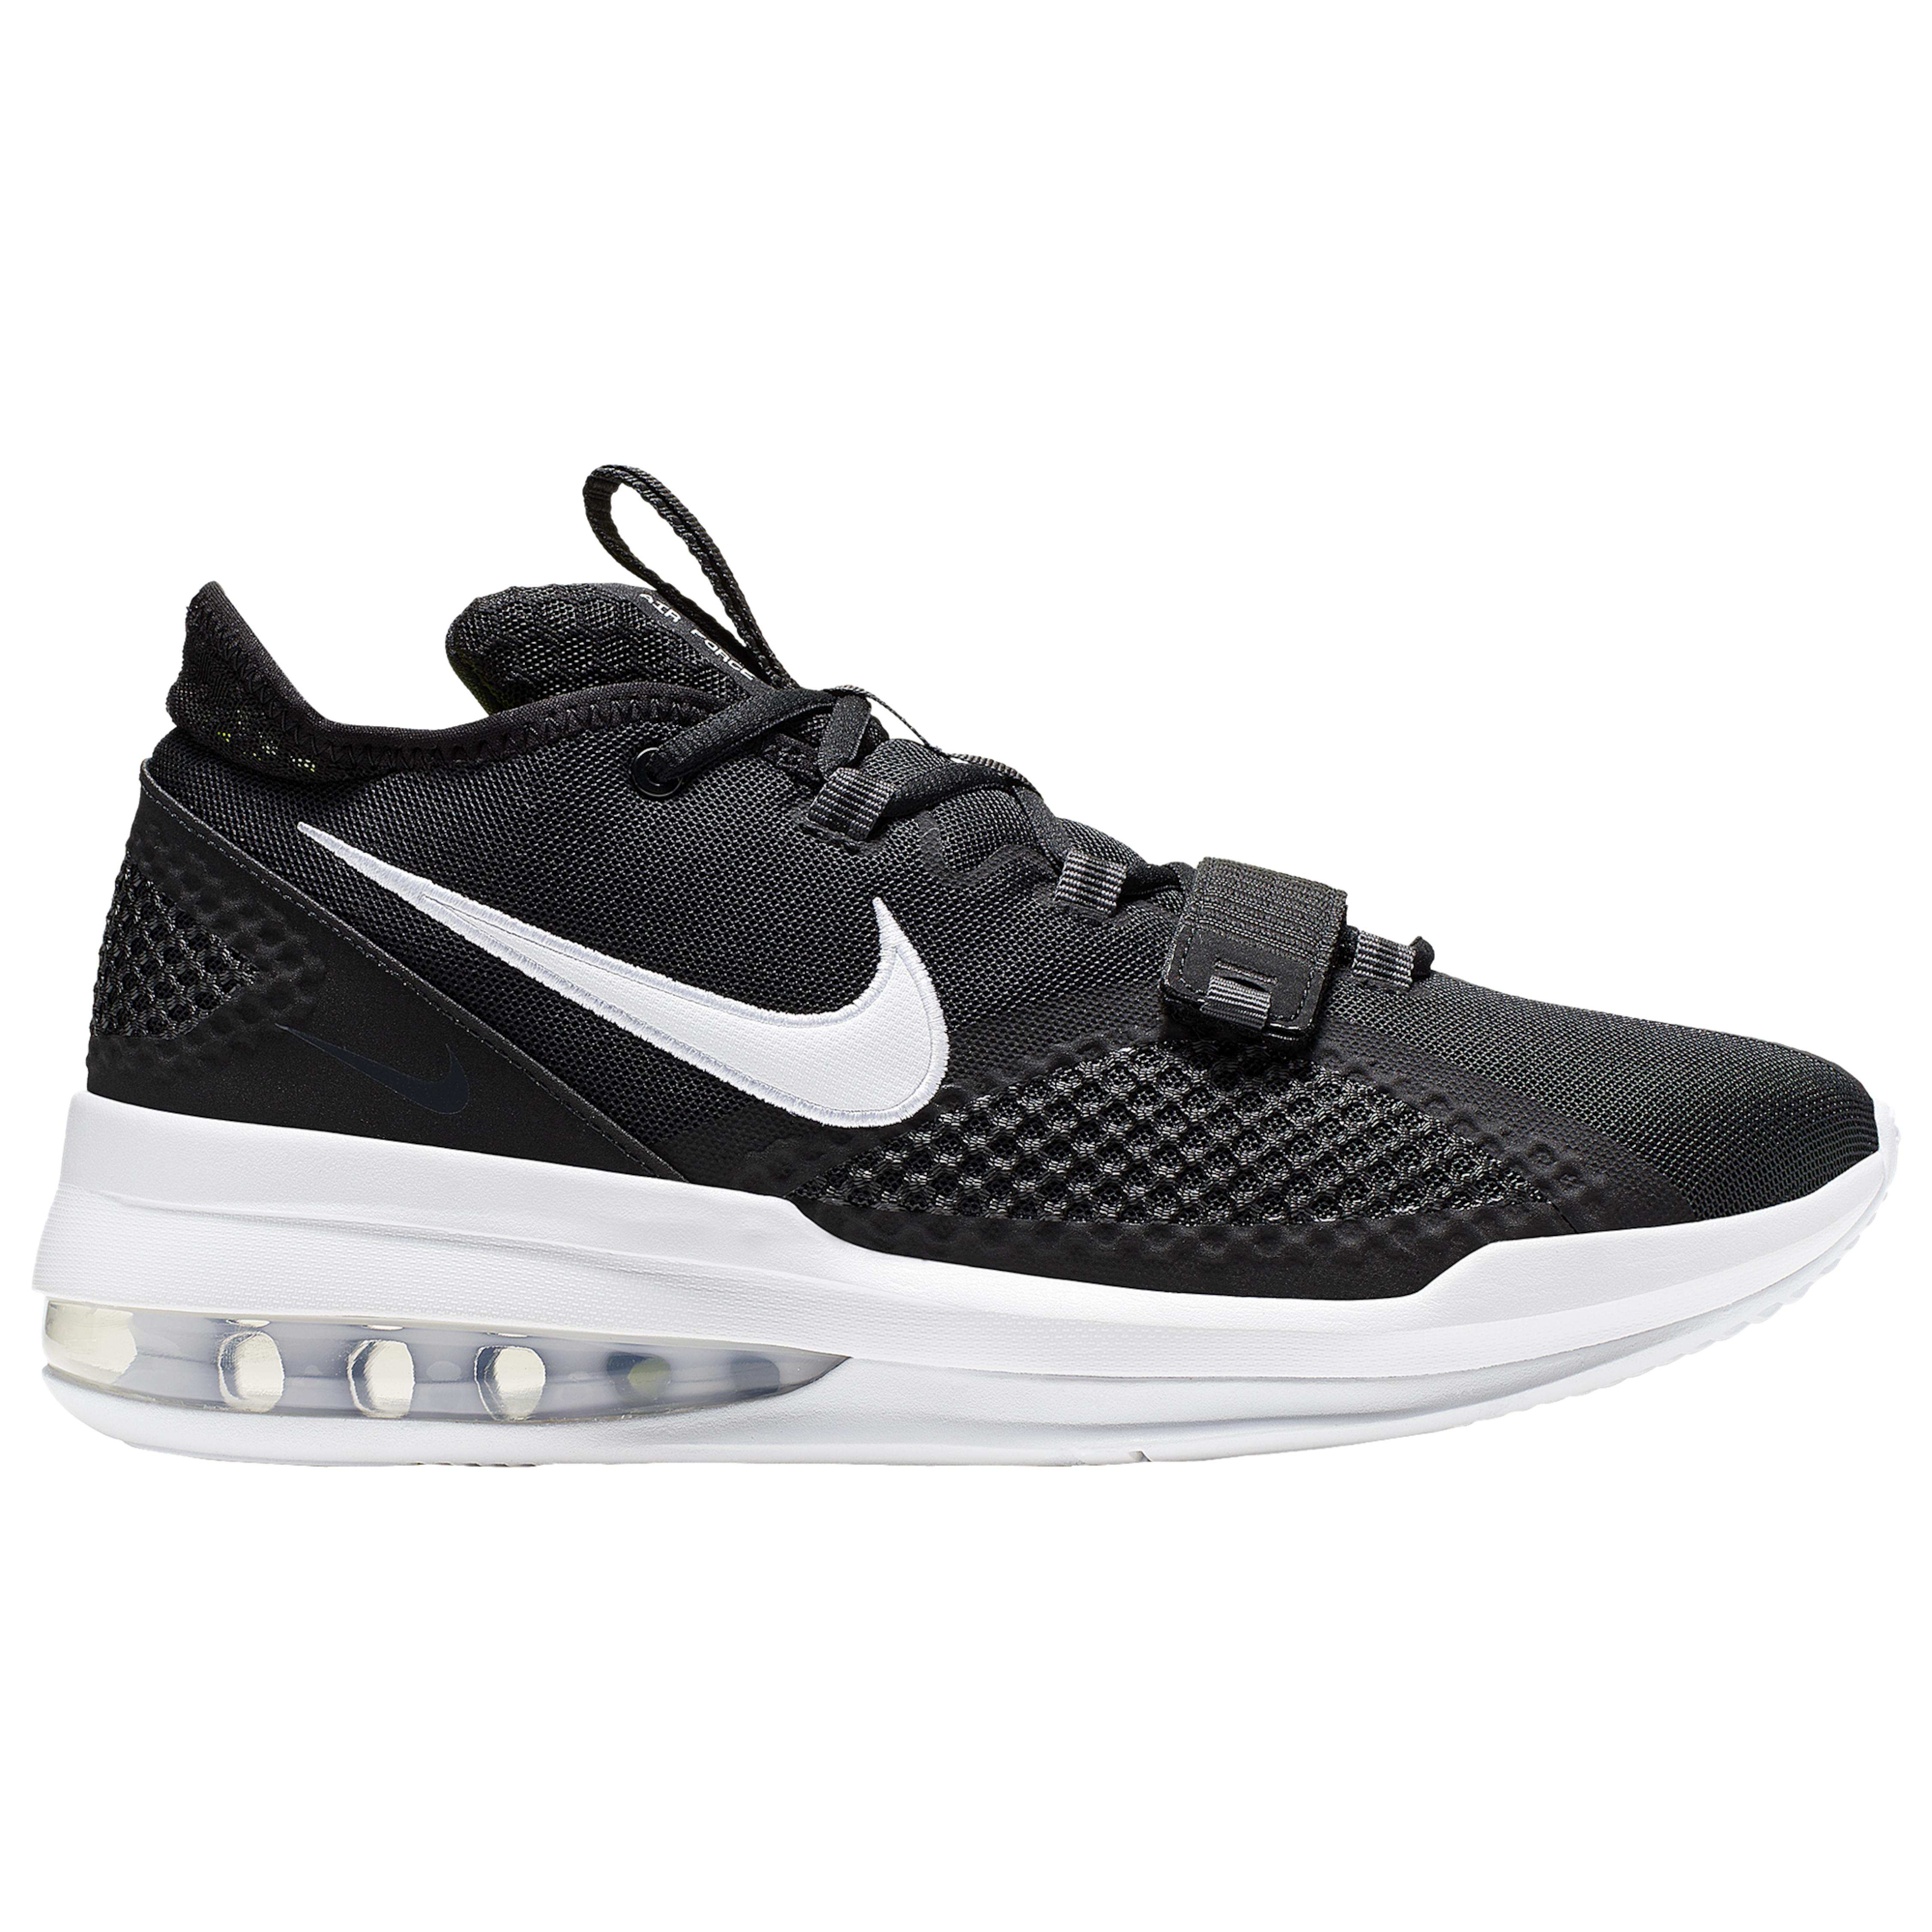 Nike Air Force Max Low Basketball Shoe in Black for Men - Save 64% - Lyst